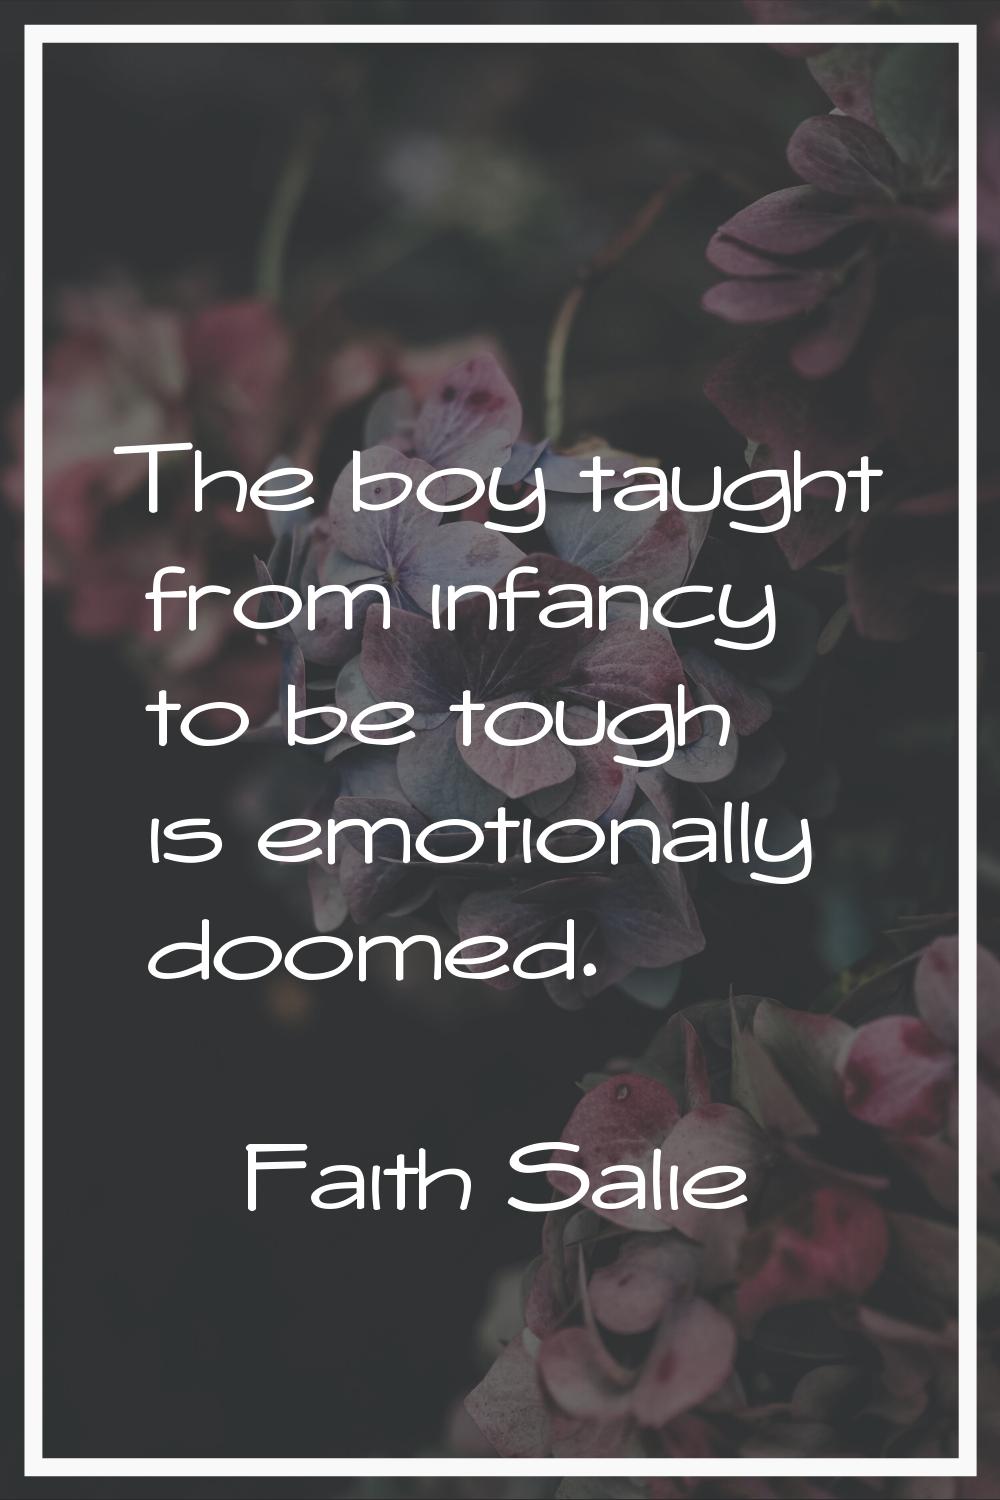 The boy taught from infancy to be tough is emotionally doomed.